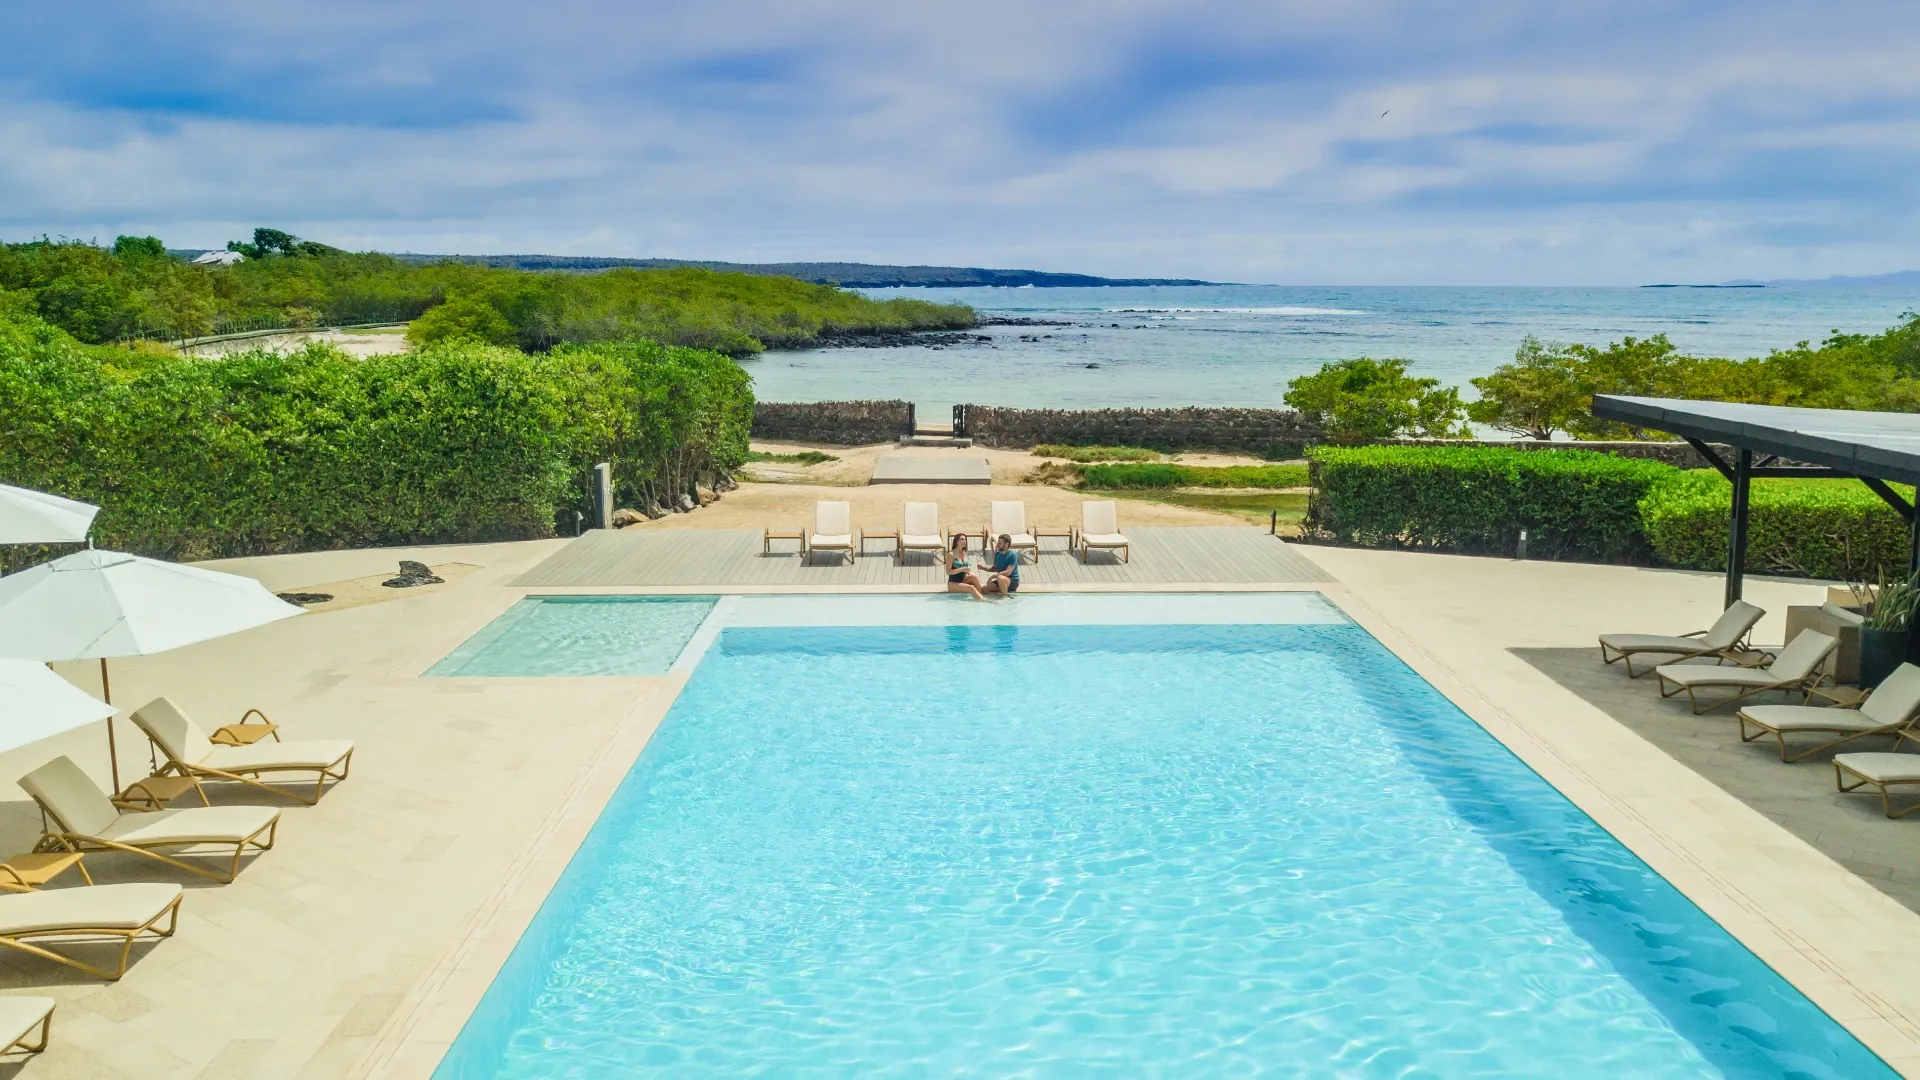 Galapagos Deals: Pool Finch Bay Spaces